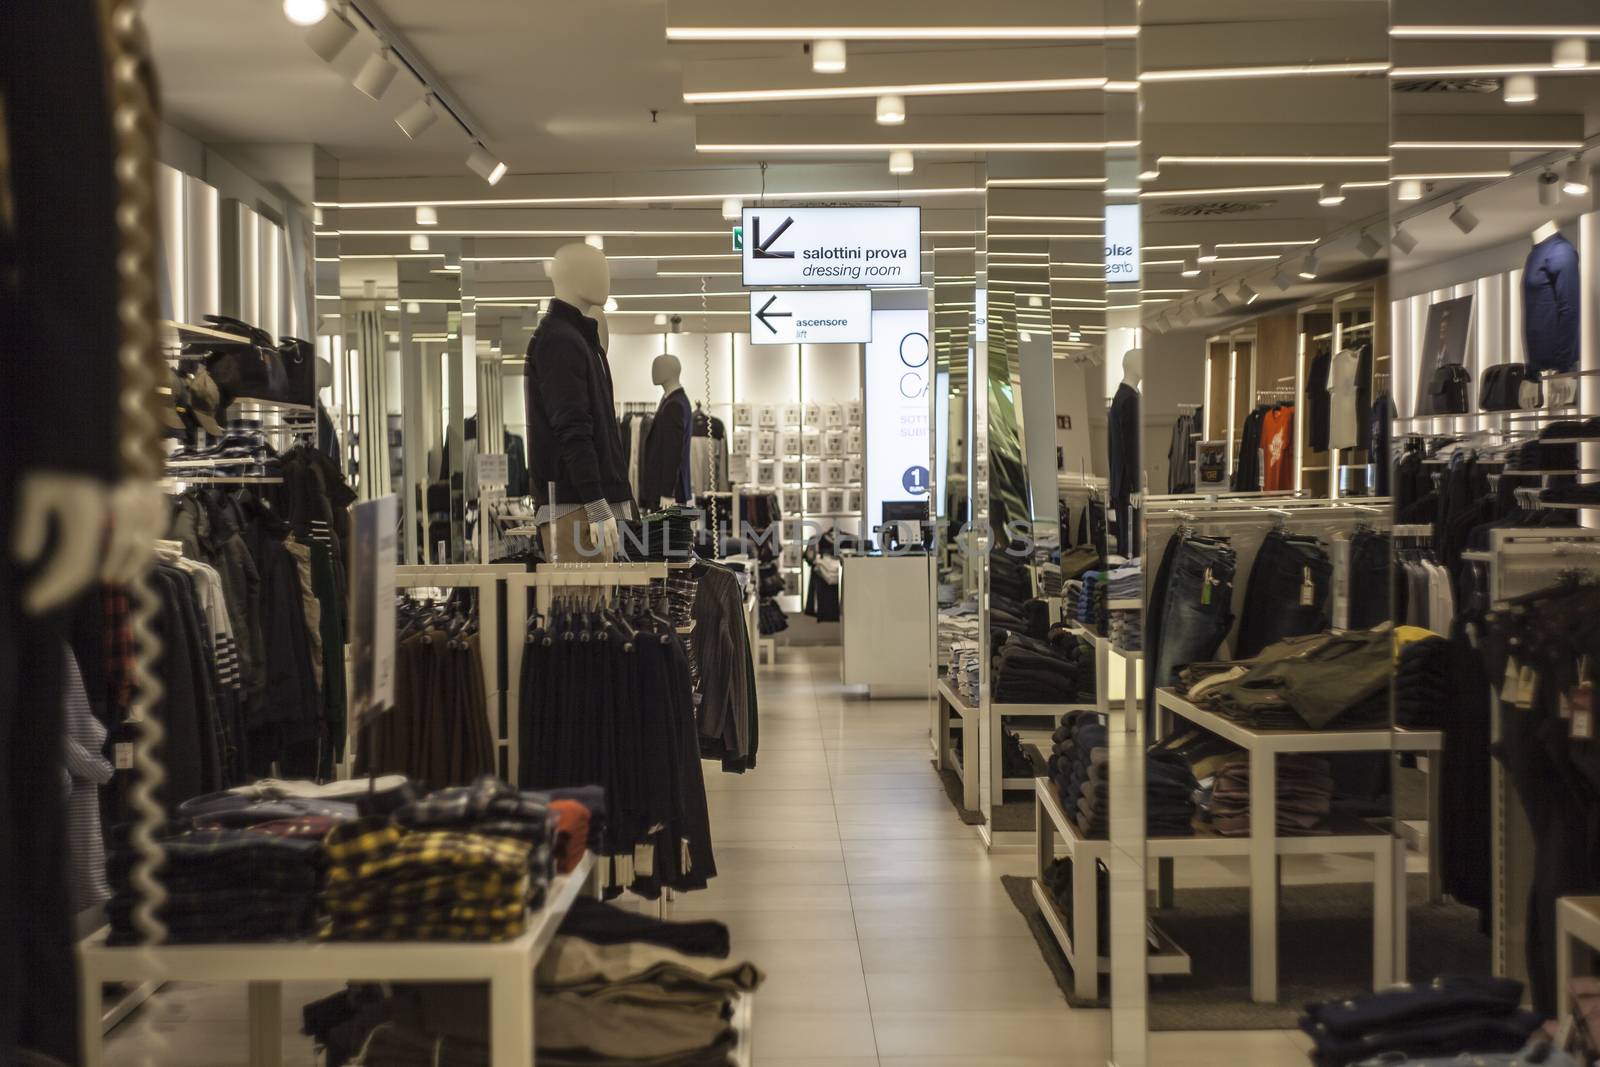 Interior of a clothing store by pippocarlot